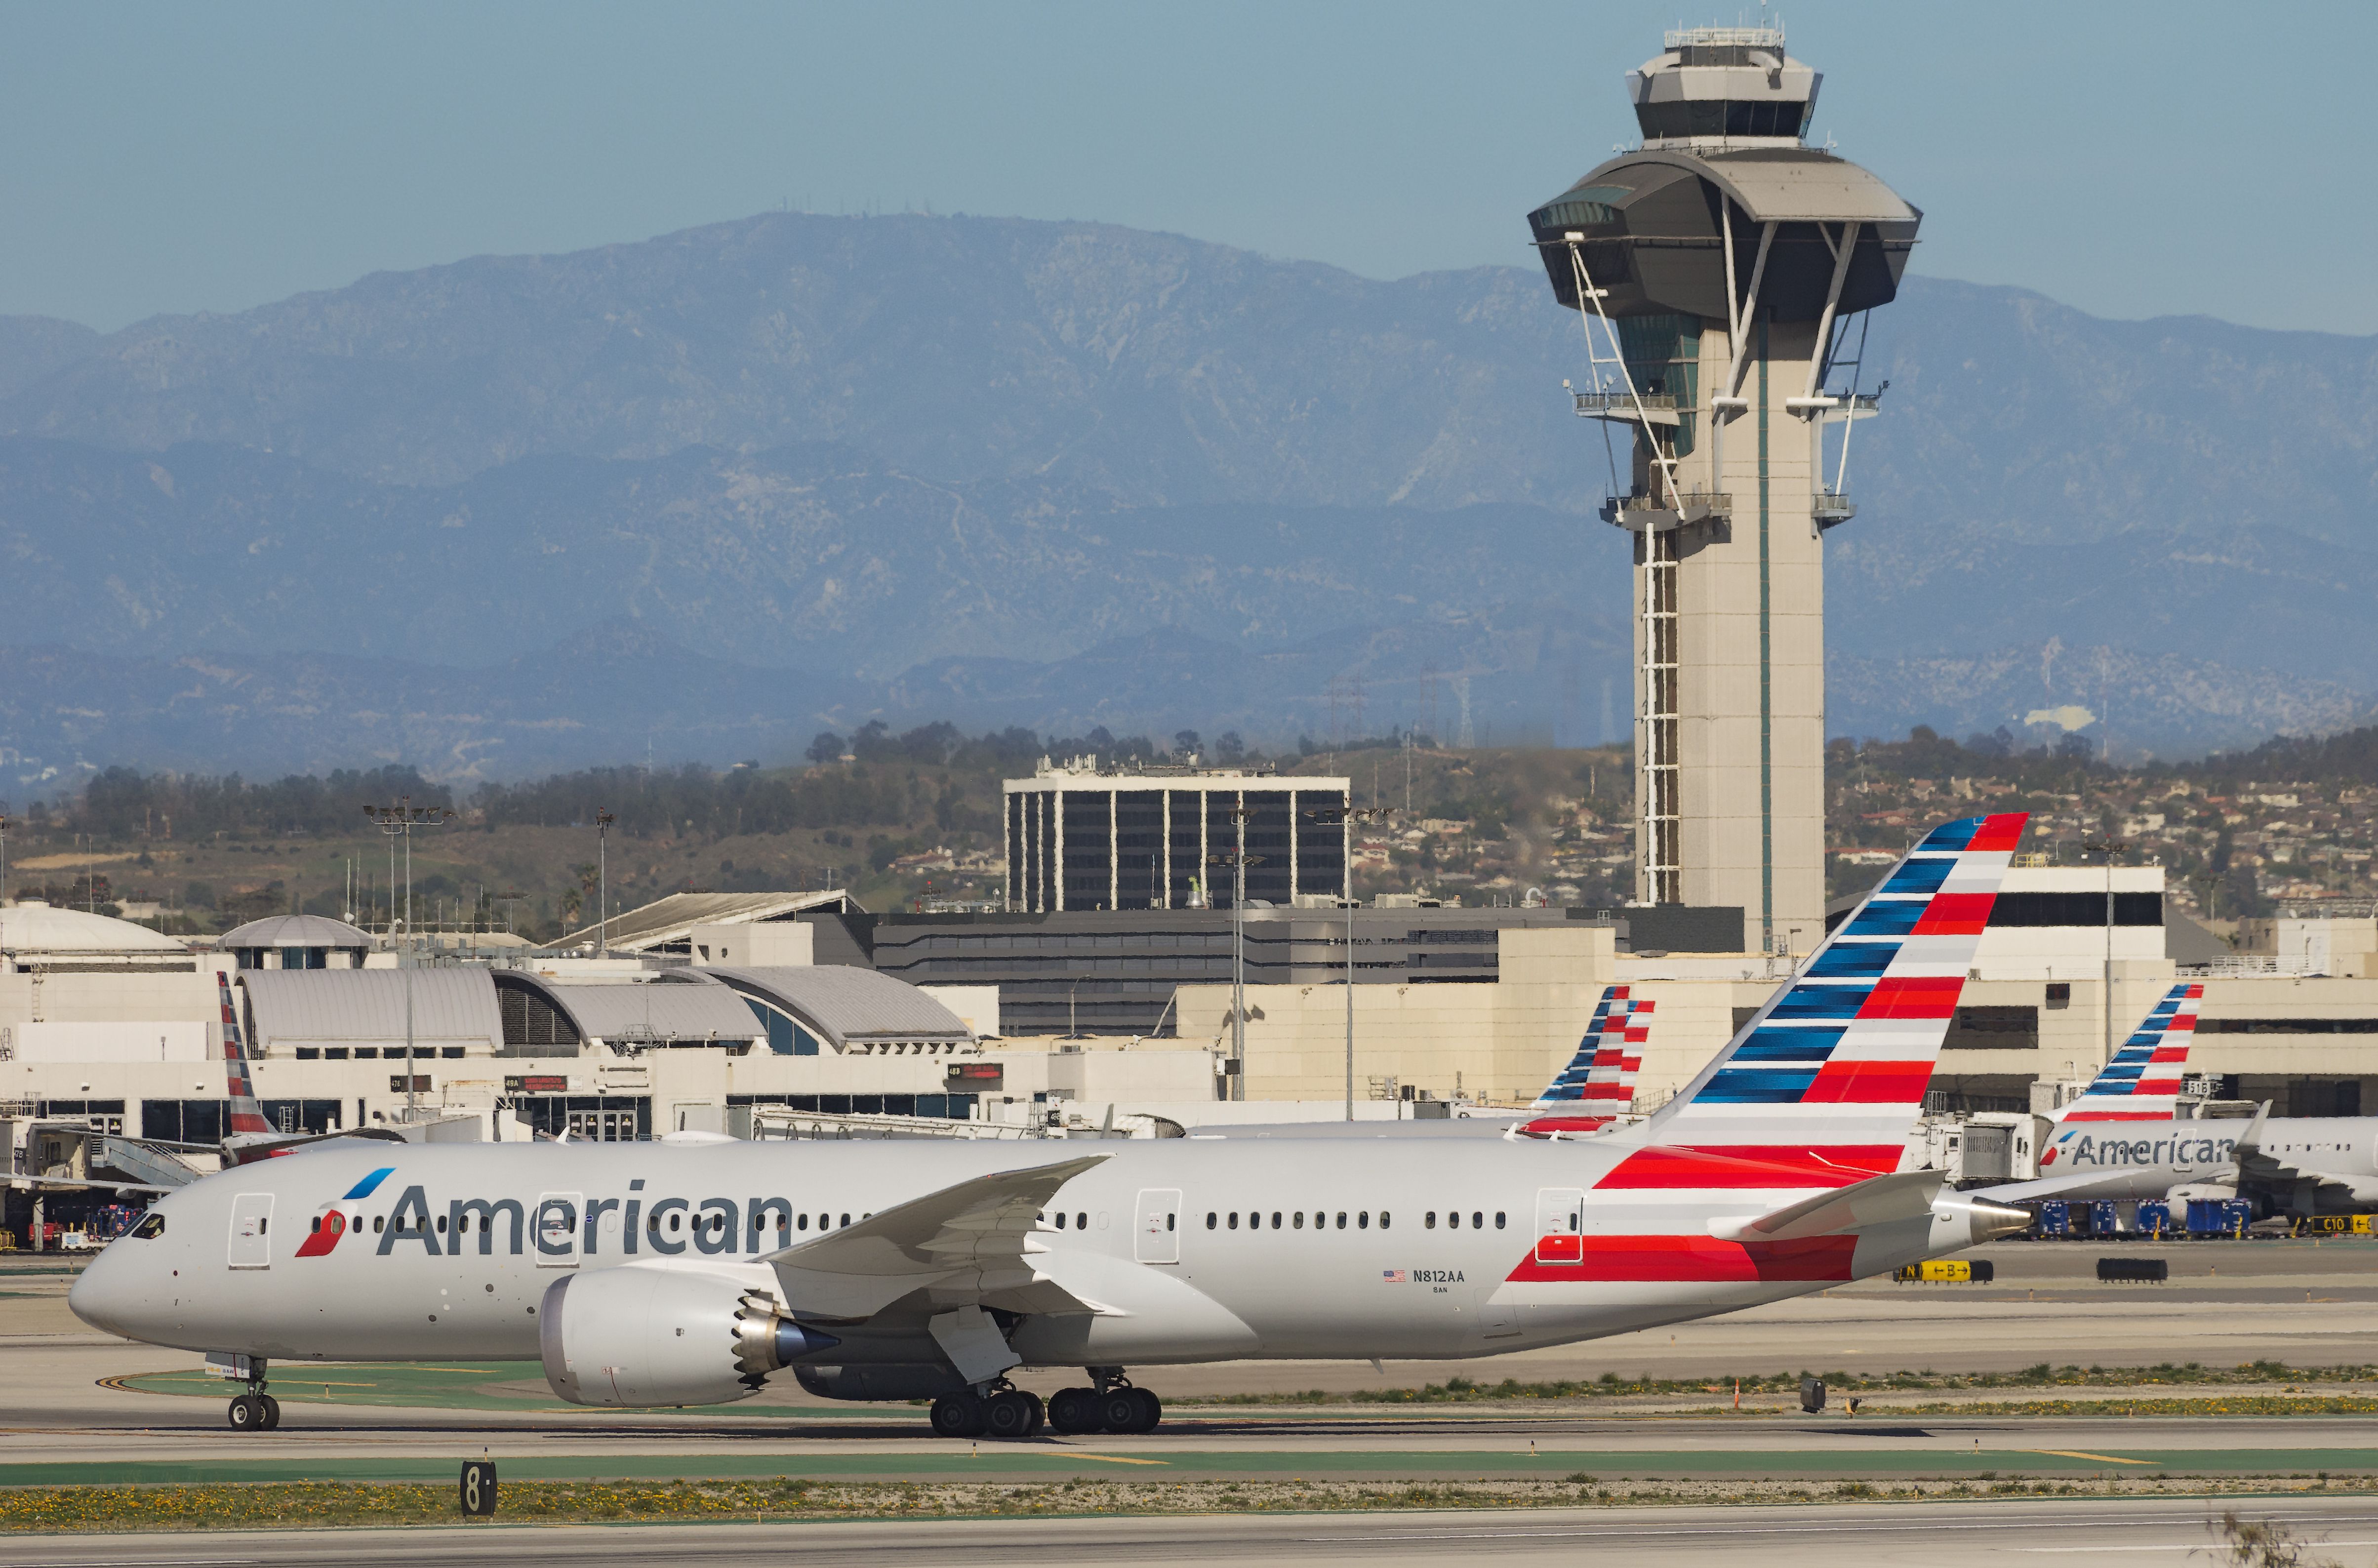 An American Airlines aircraft on the runway at LAX.